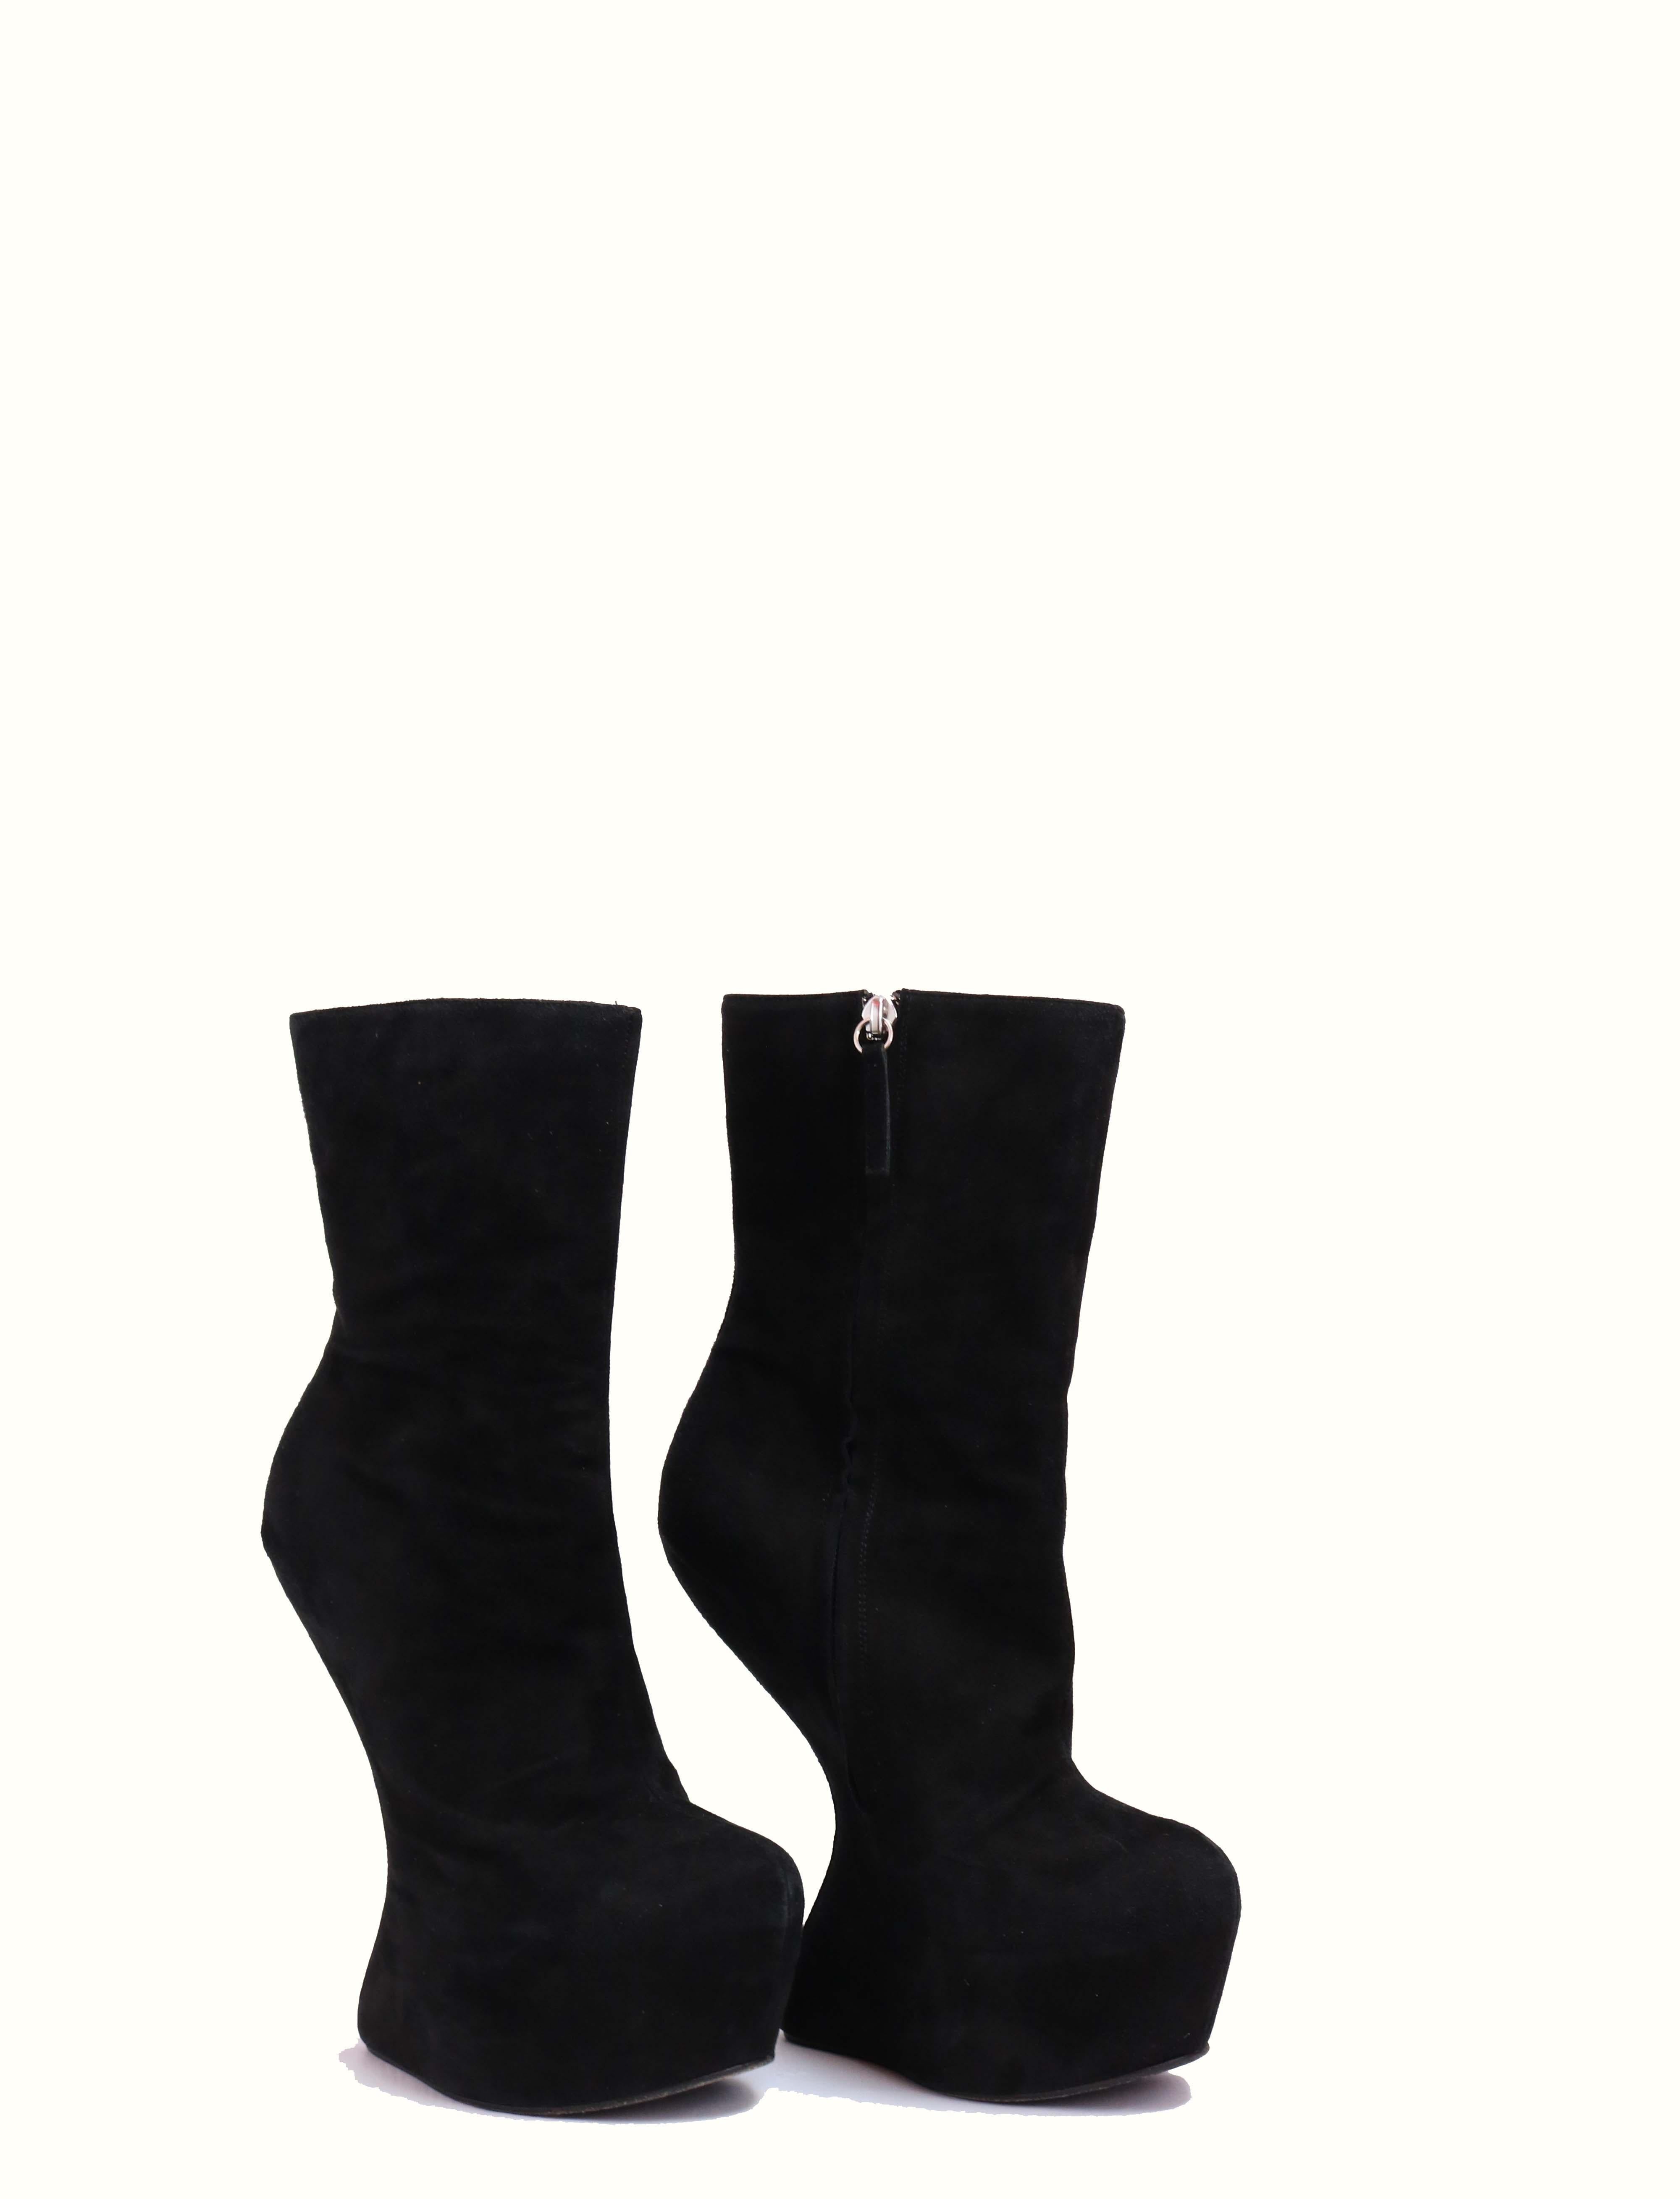 Guiseppe Zanotti Suede Black Booties Size US 7.5 For Sale 1